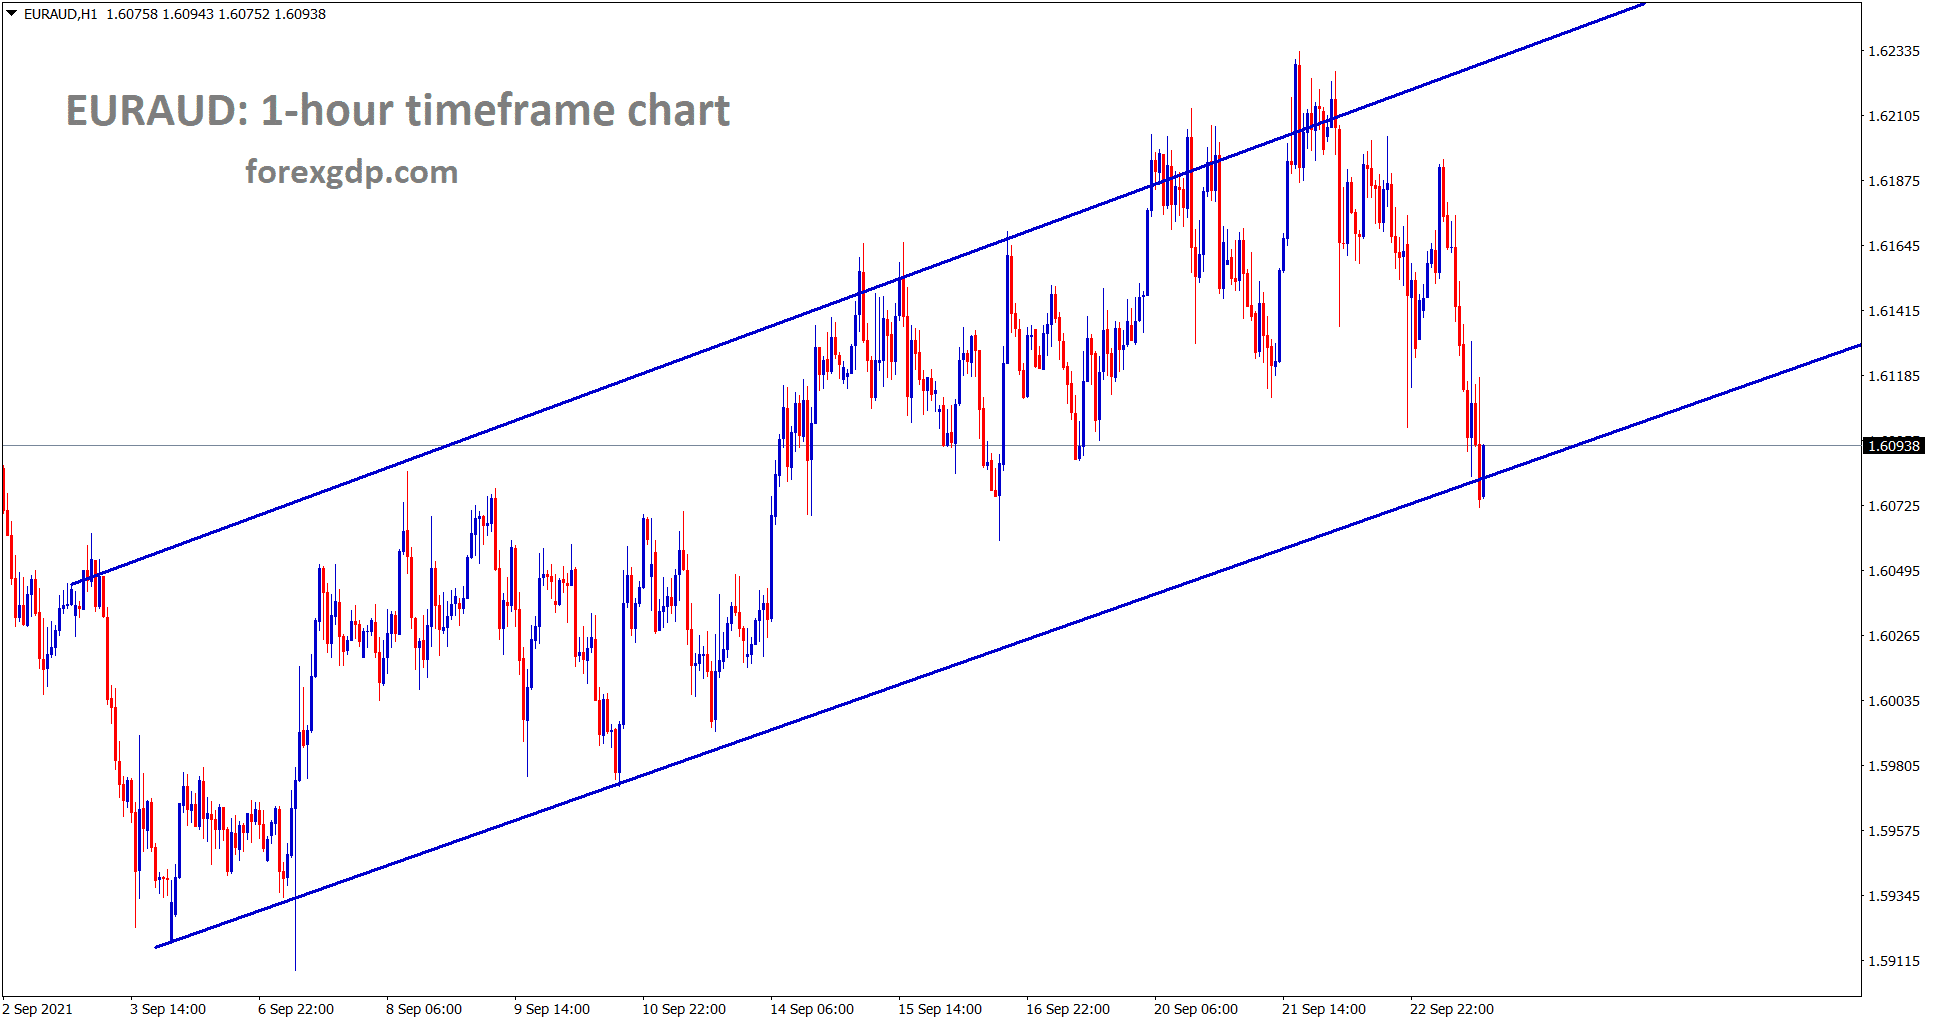 EURAUD is moving between the channel ranges wait for breakout from this channel